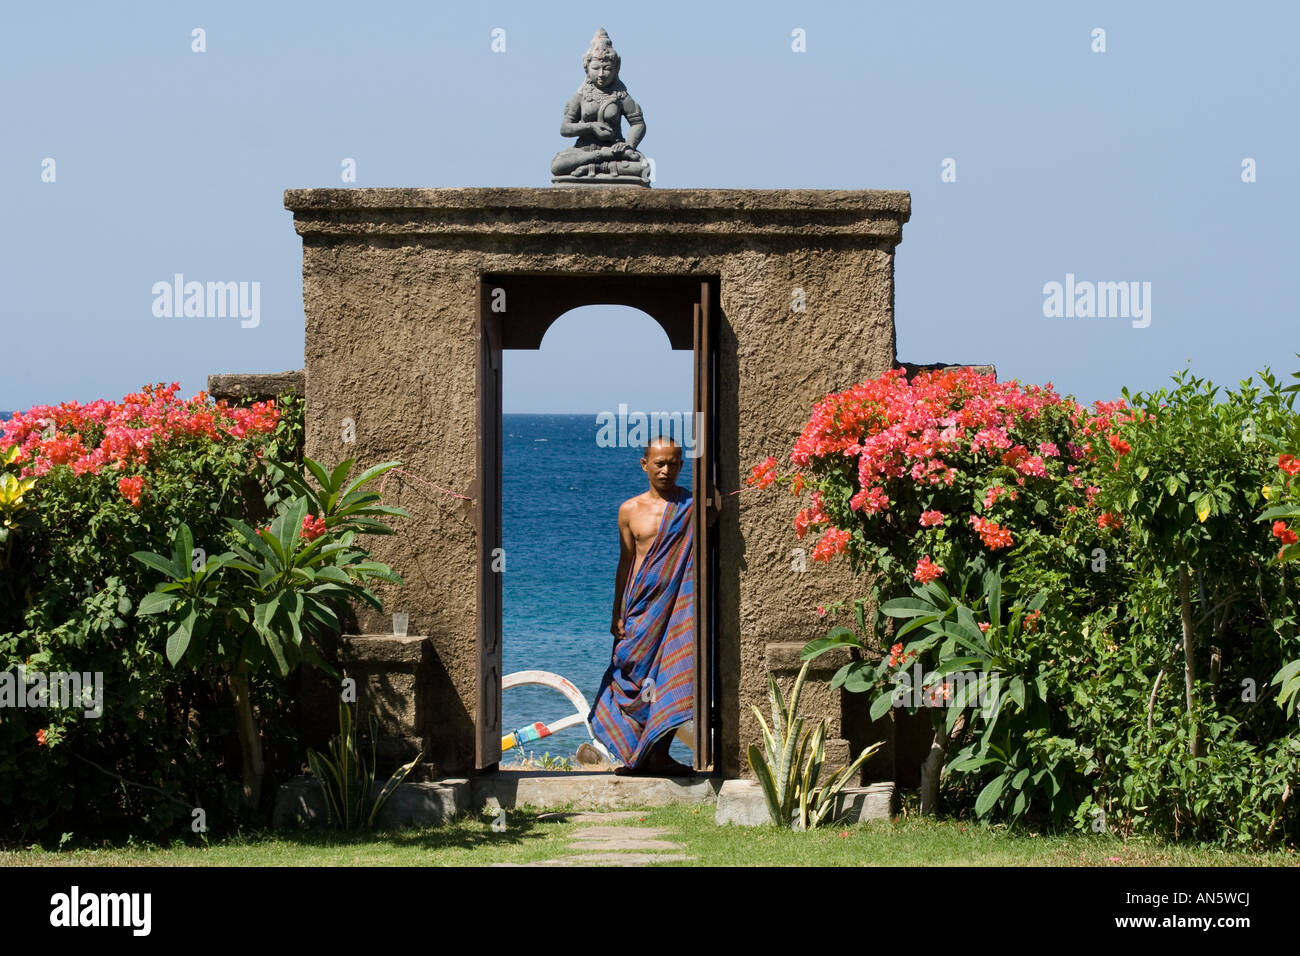 Balinese Man in Sarong under Buddha Statue on the Beach Amed Bali Indonesia Stock Photo